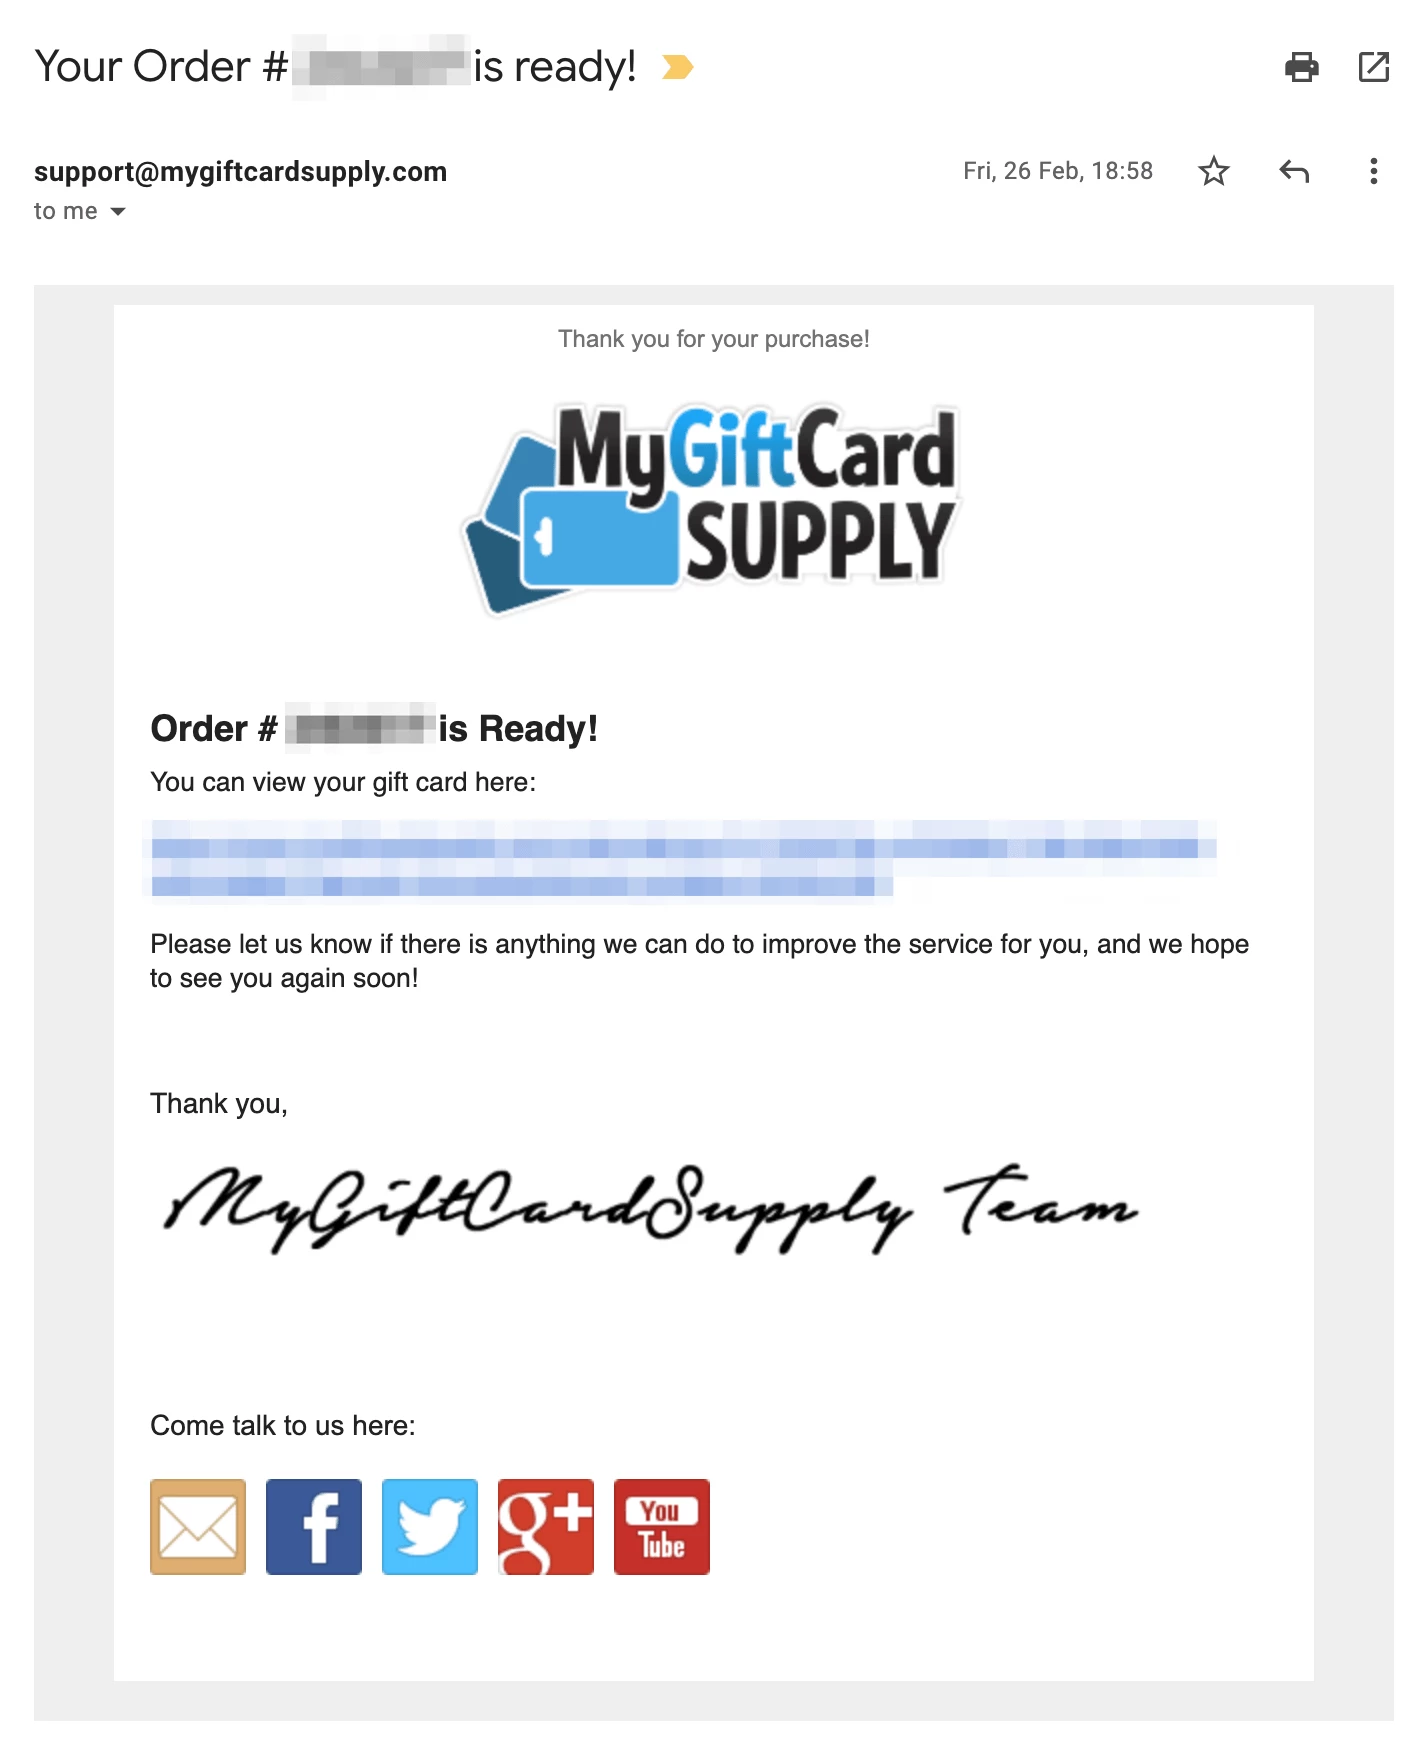 MyGiftCardSupply download confirmation email